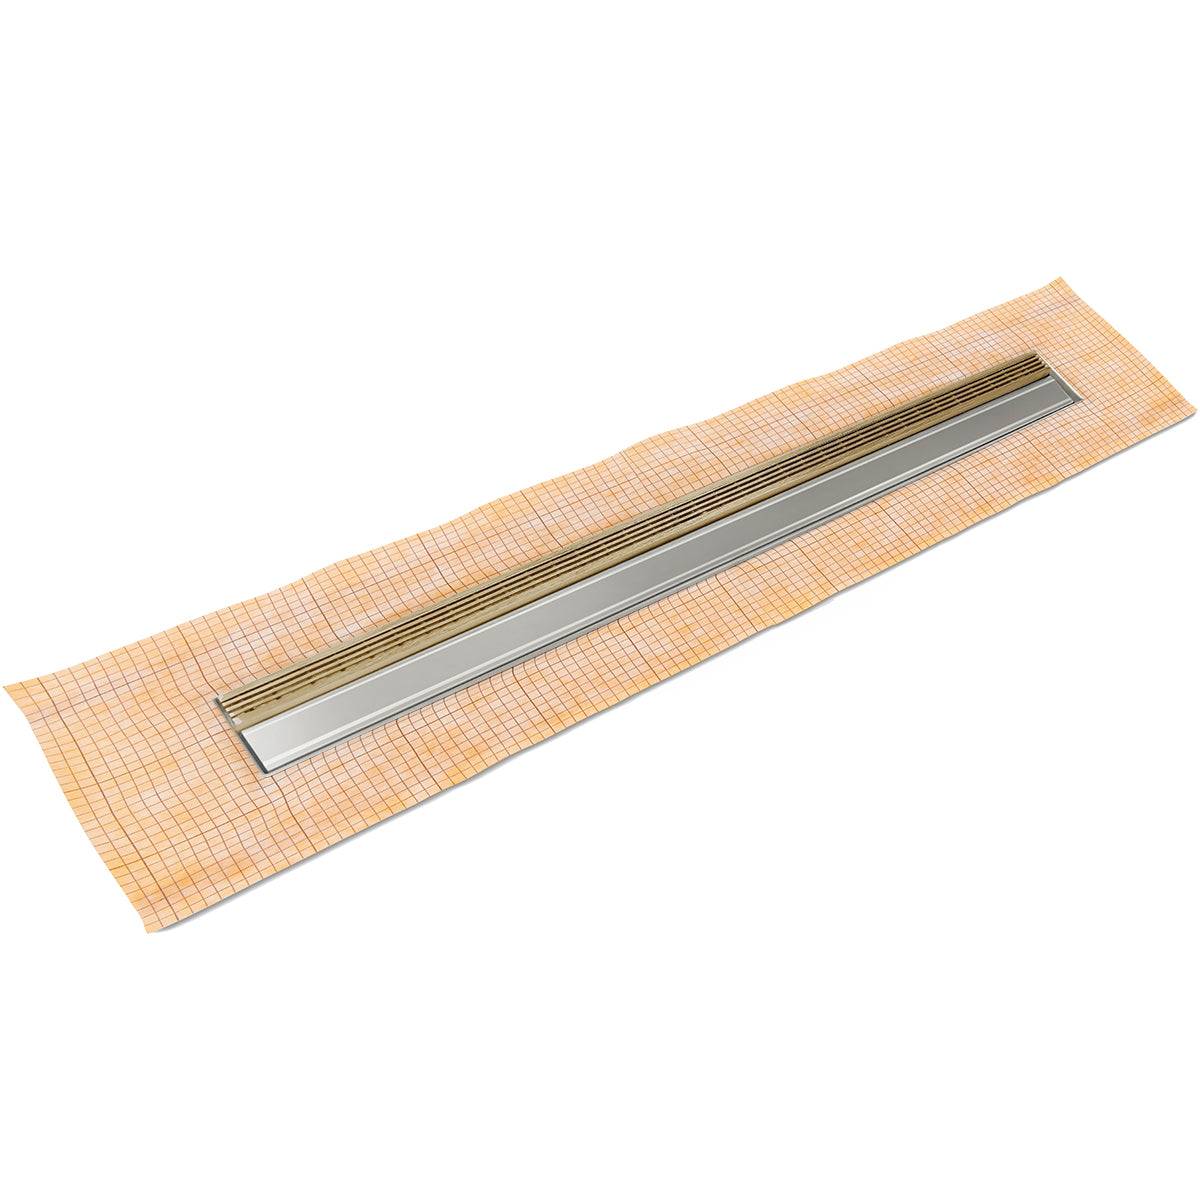 Infinity Drain 42" FCS Series Schluter-Kerdi - Fixed Flange Linear Drain Kit with 1" Wedge Wire Grate